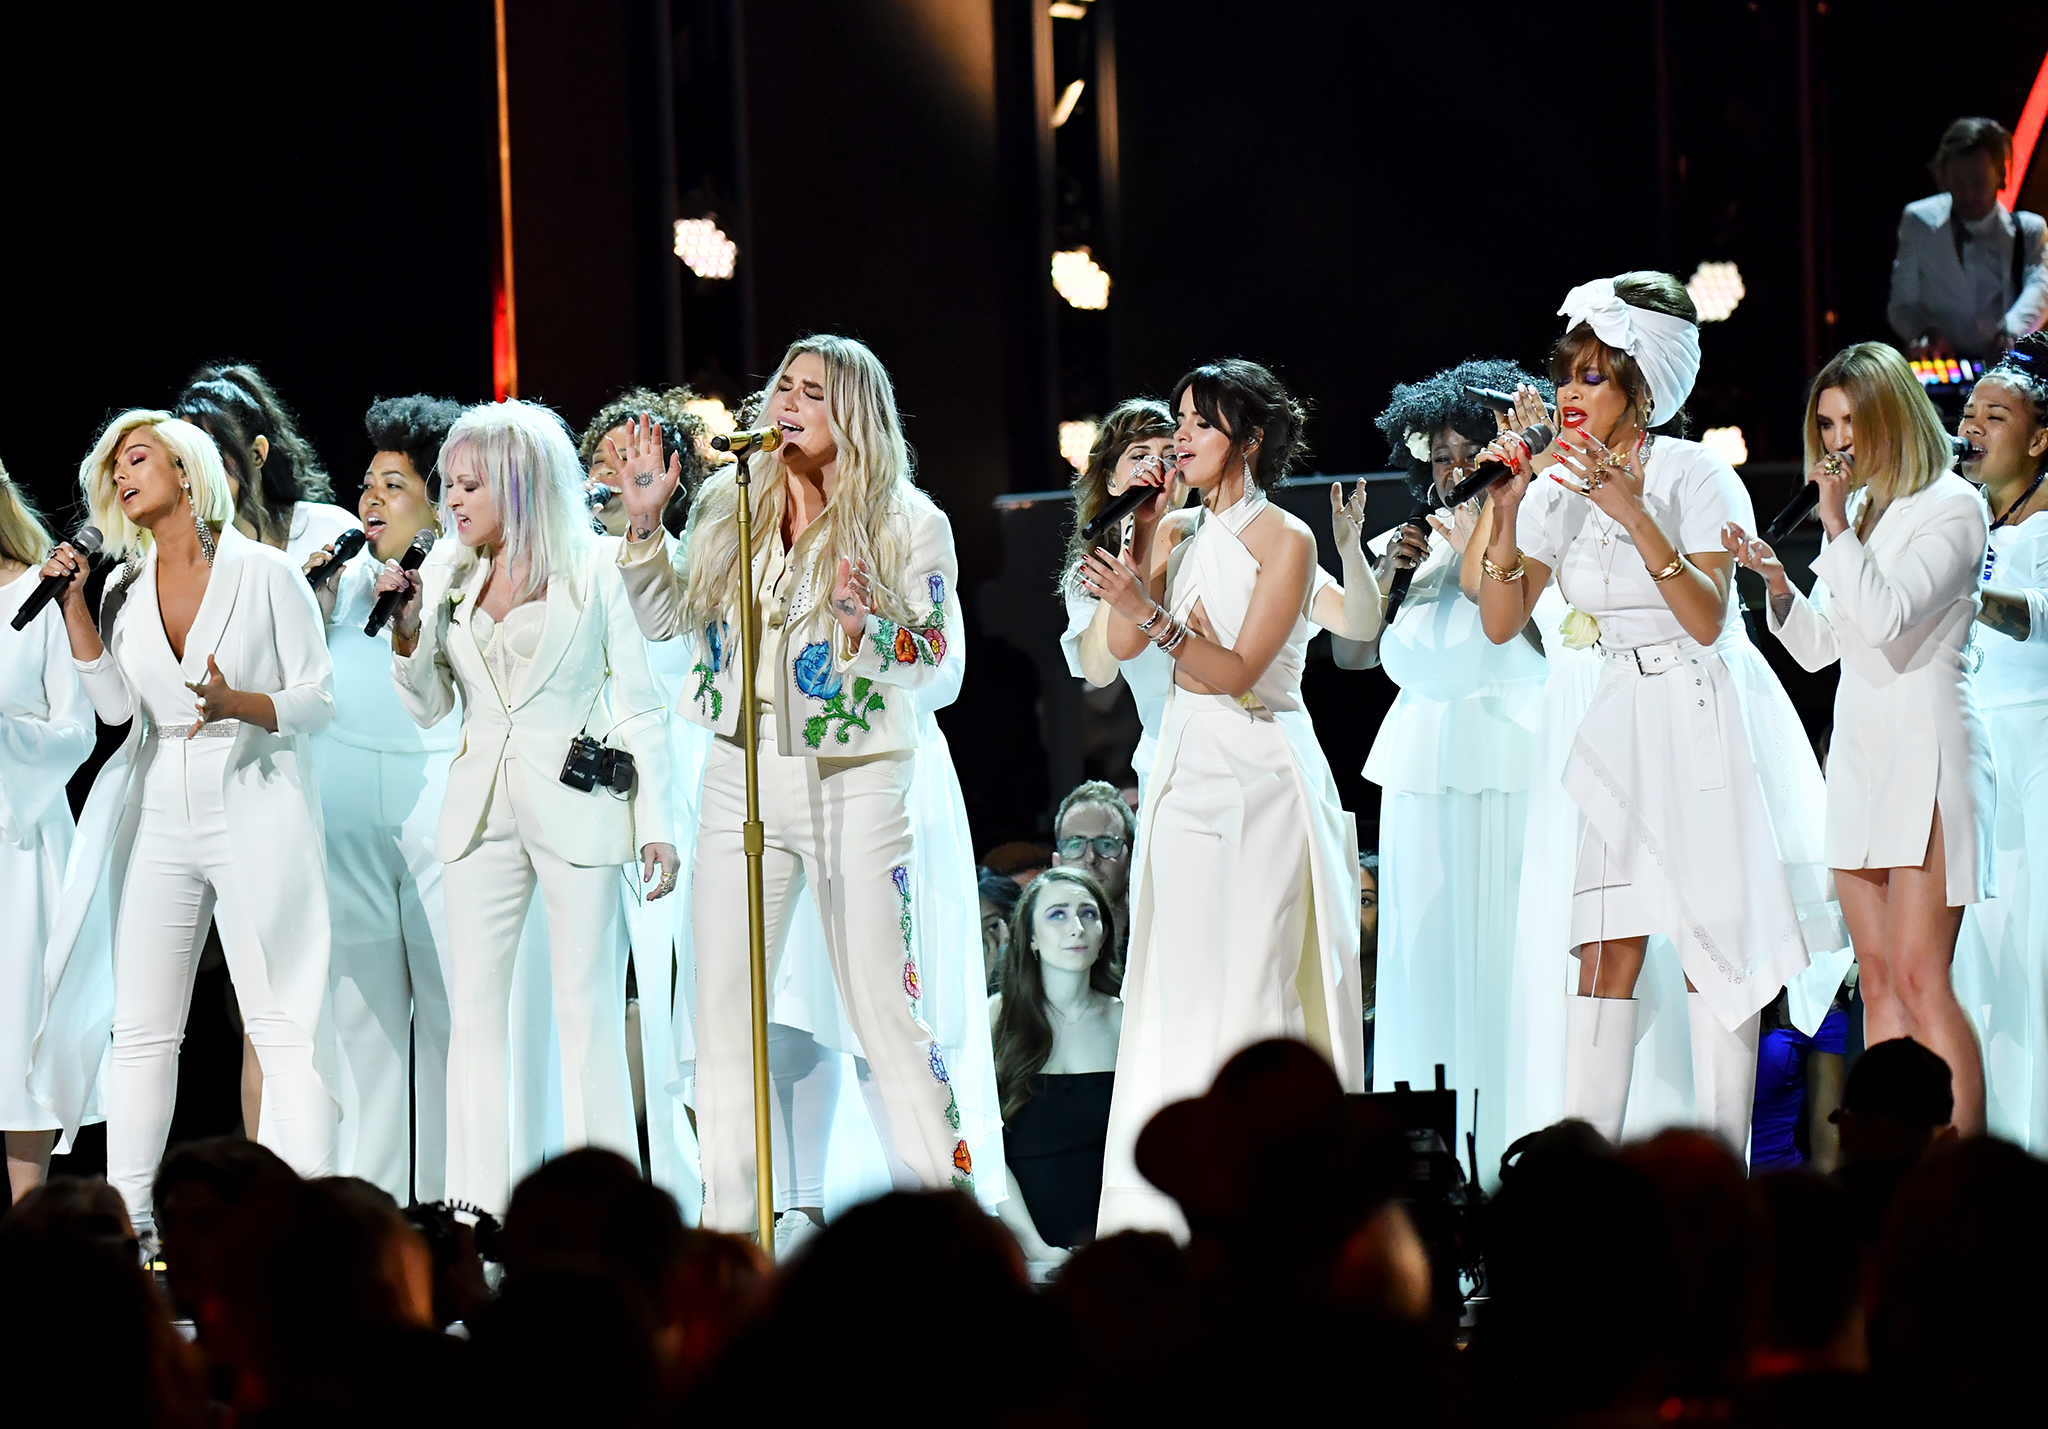 Recording artists Bebe Rexha, Cyndi Lauper, Kesha, Camila Cabello, Andra Day and Julia Michaels perform onstage during the 60th Annual GRAMMY Awards at Madison Square Garden on January 28, 2018 in New York City. Jeff Kravitz—FilmMagic/Getty Images (Jeff Kravitz—FilmMagic/Getty Images)